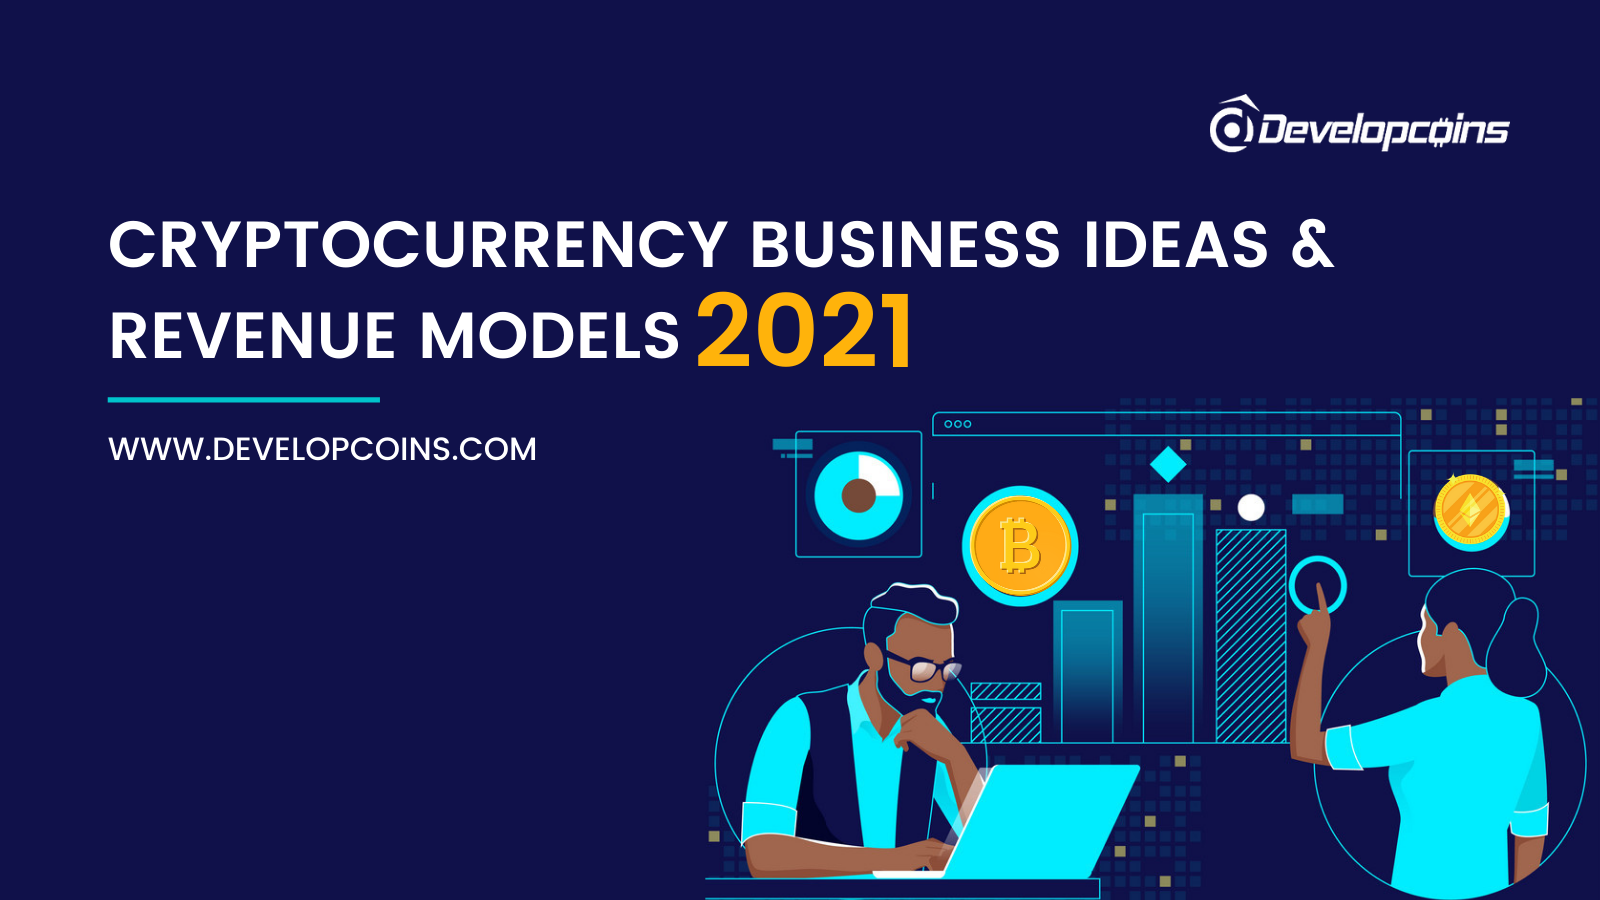 Top Cryptocurrency Business Revenue Models You Should Consider for 2021